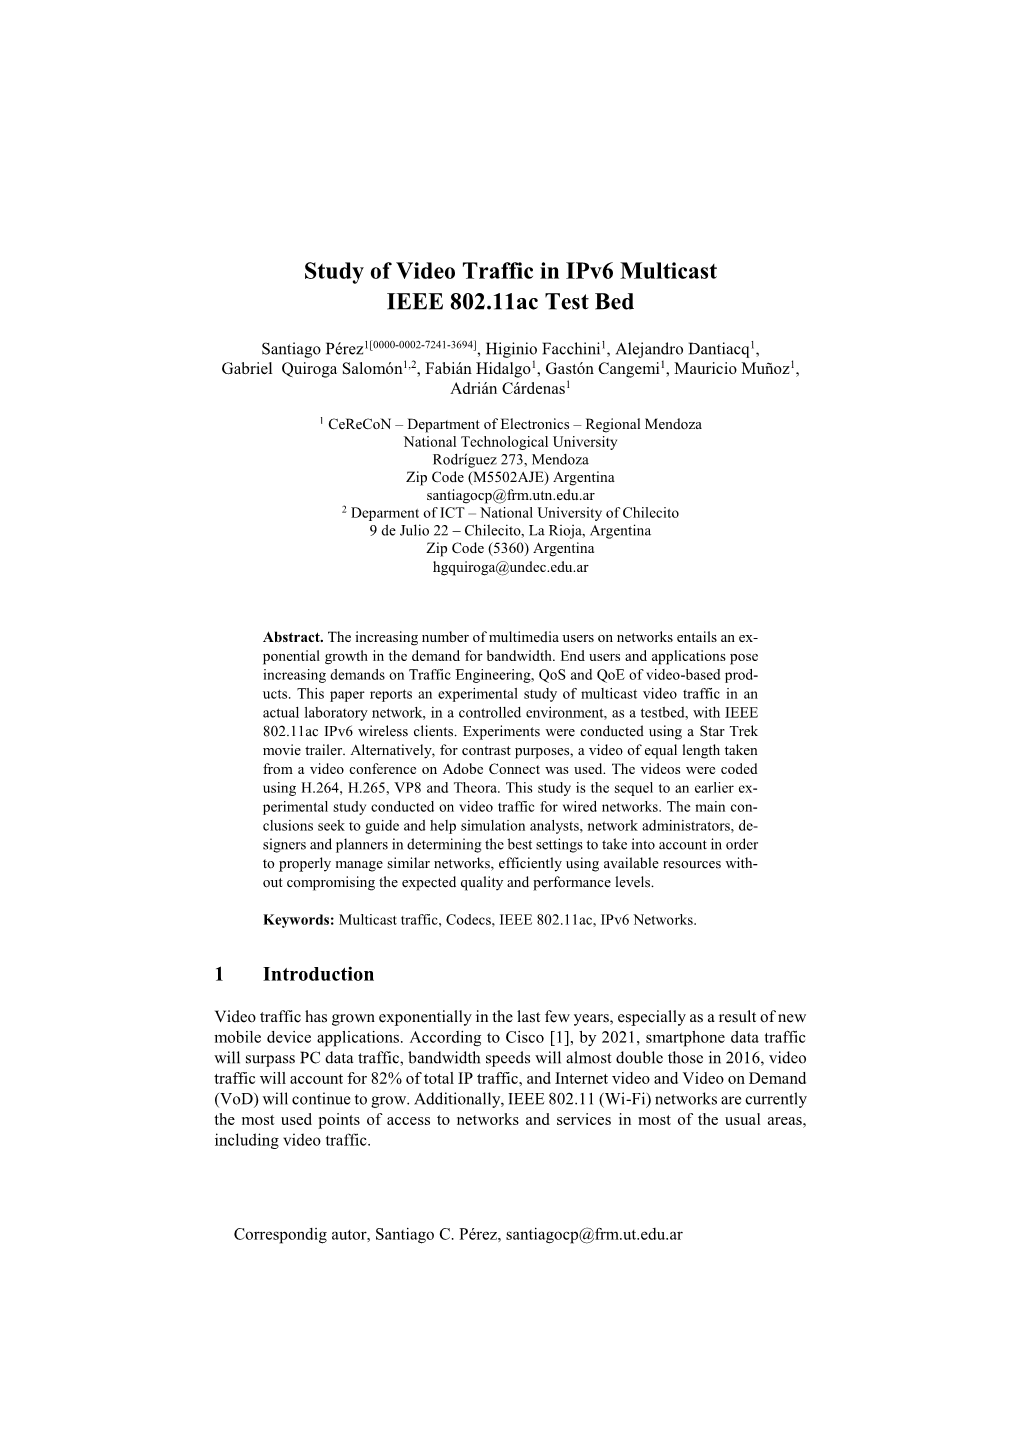 Study of Video Traffic in Ipv6 Multicast IEEE 802.11Ac Test Bed